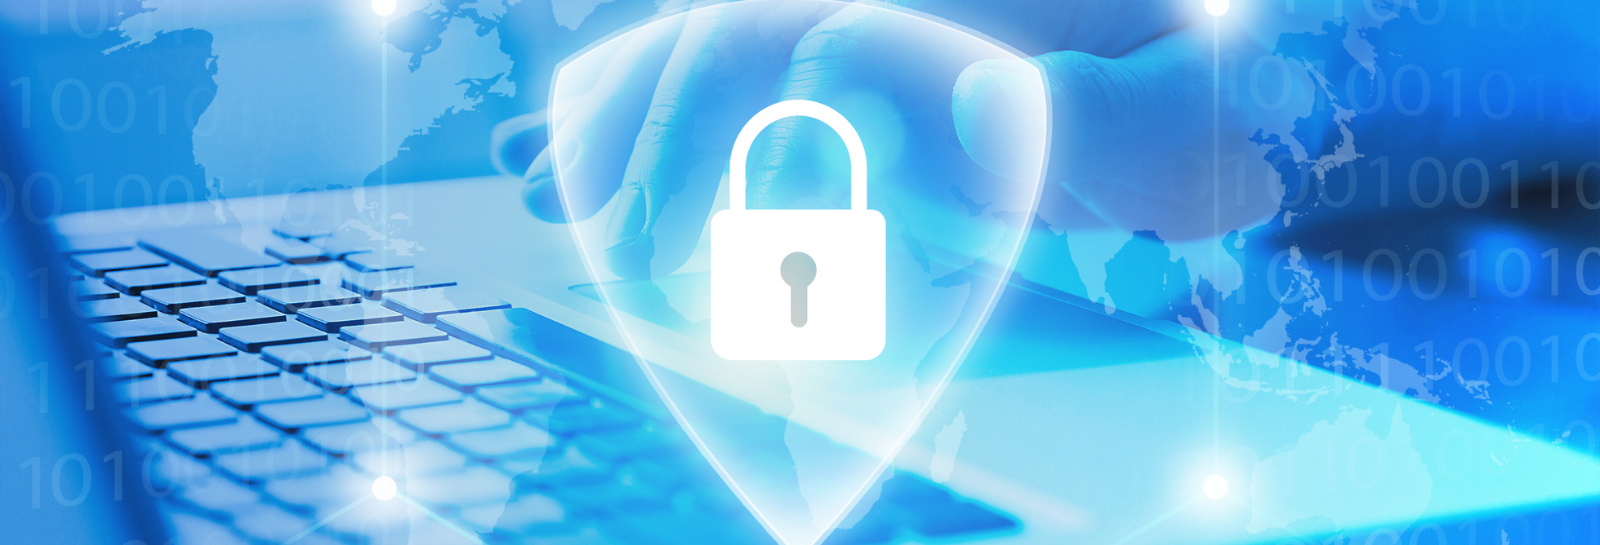 cybersecurity banner banner image